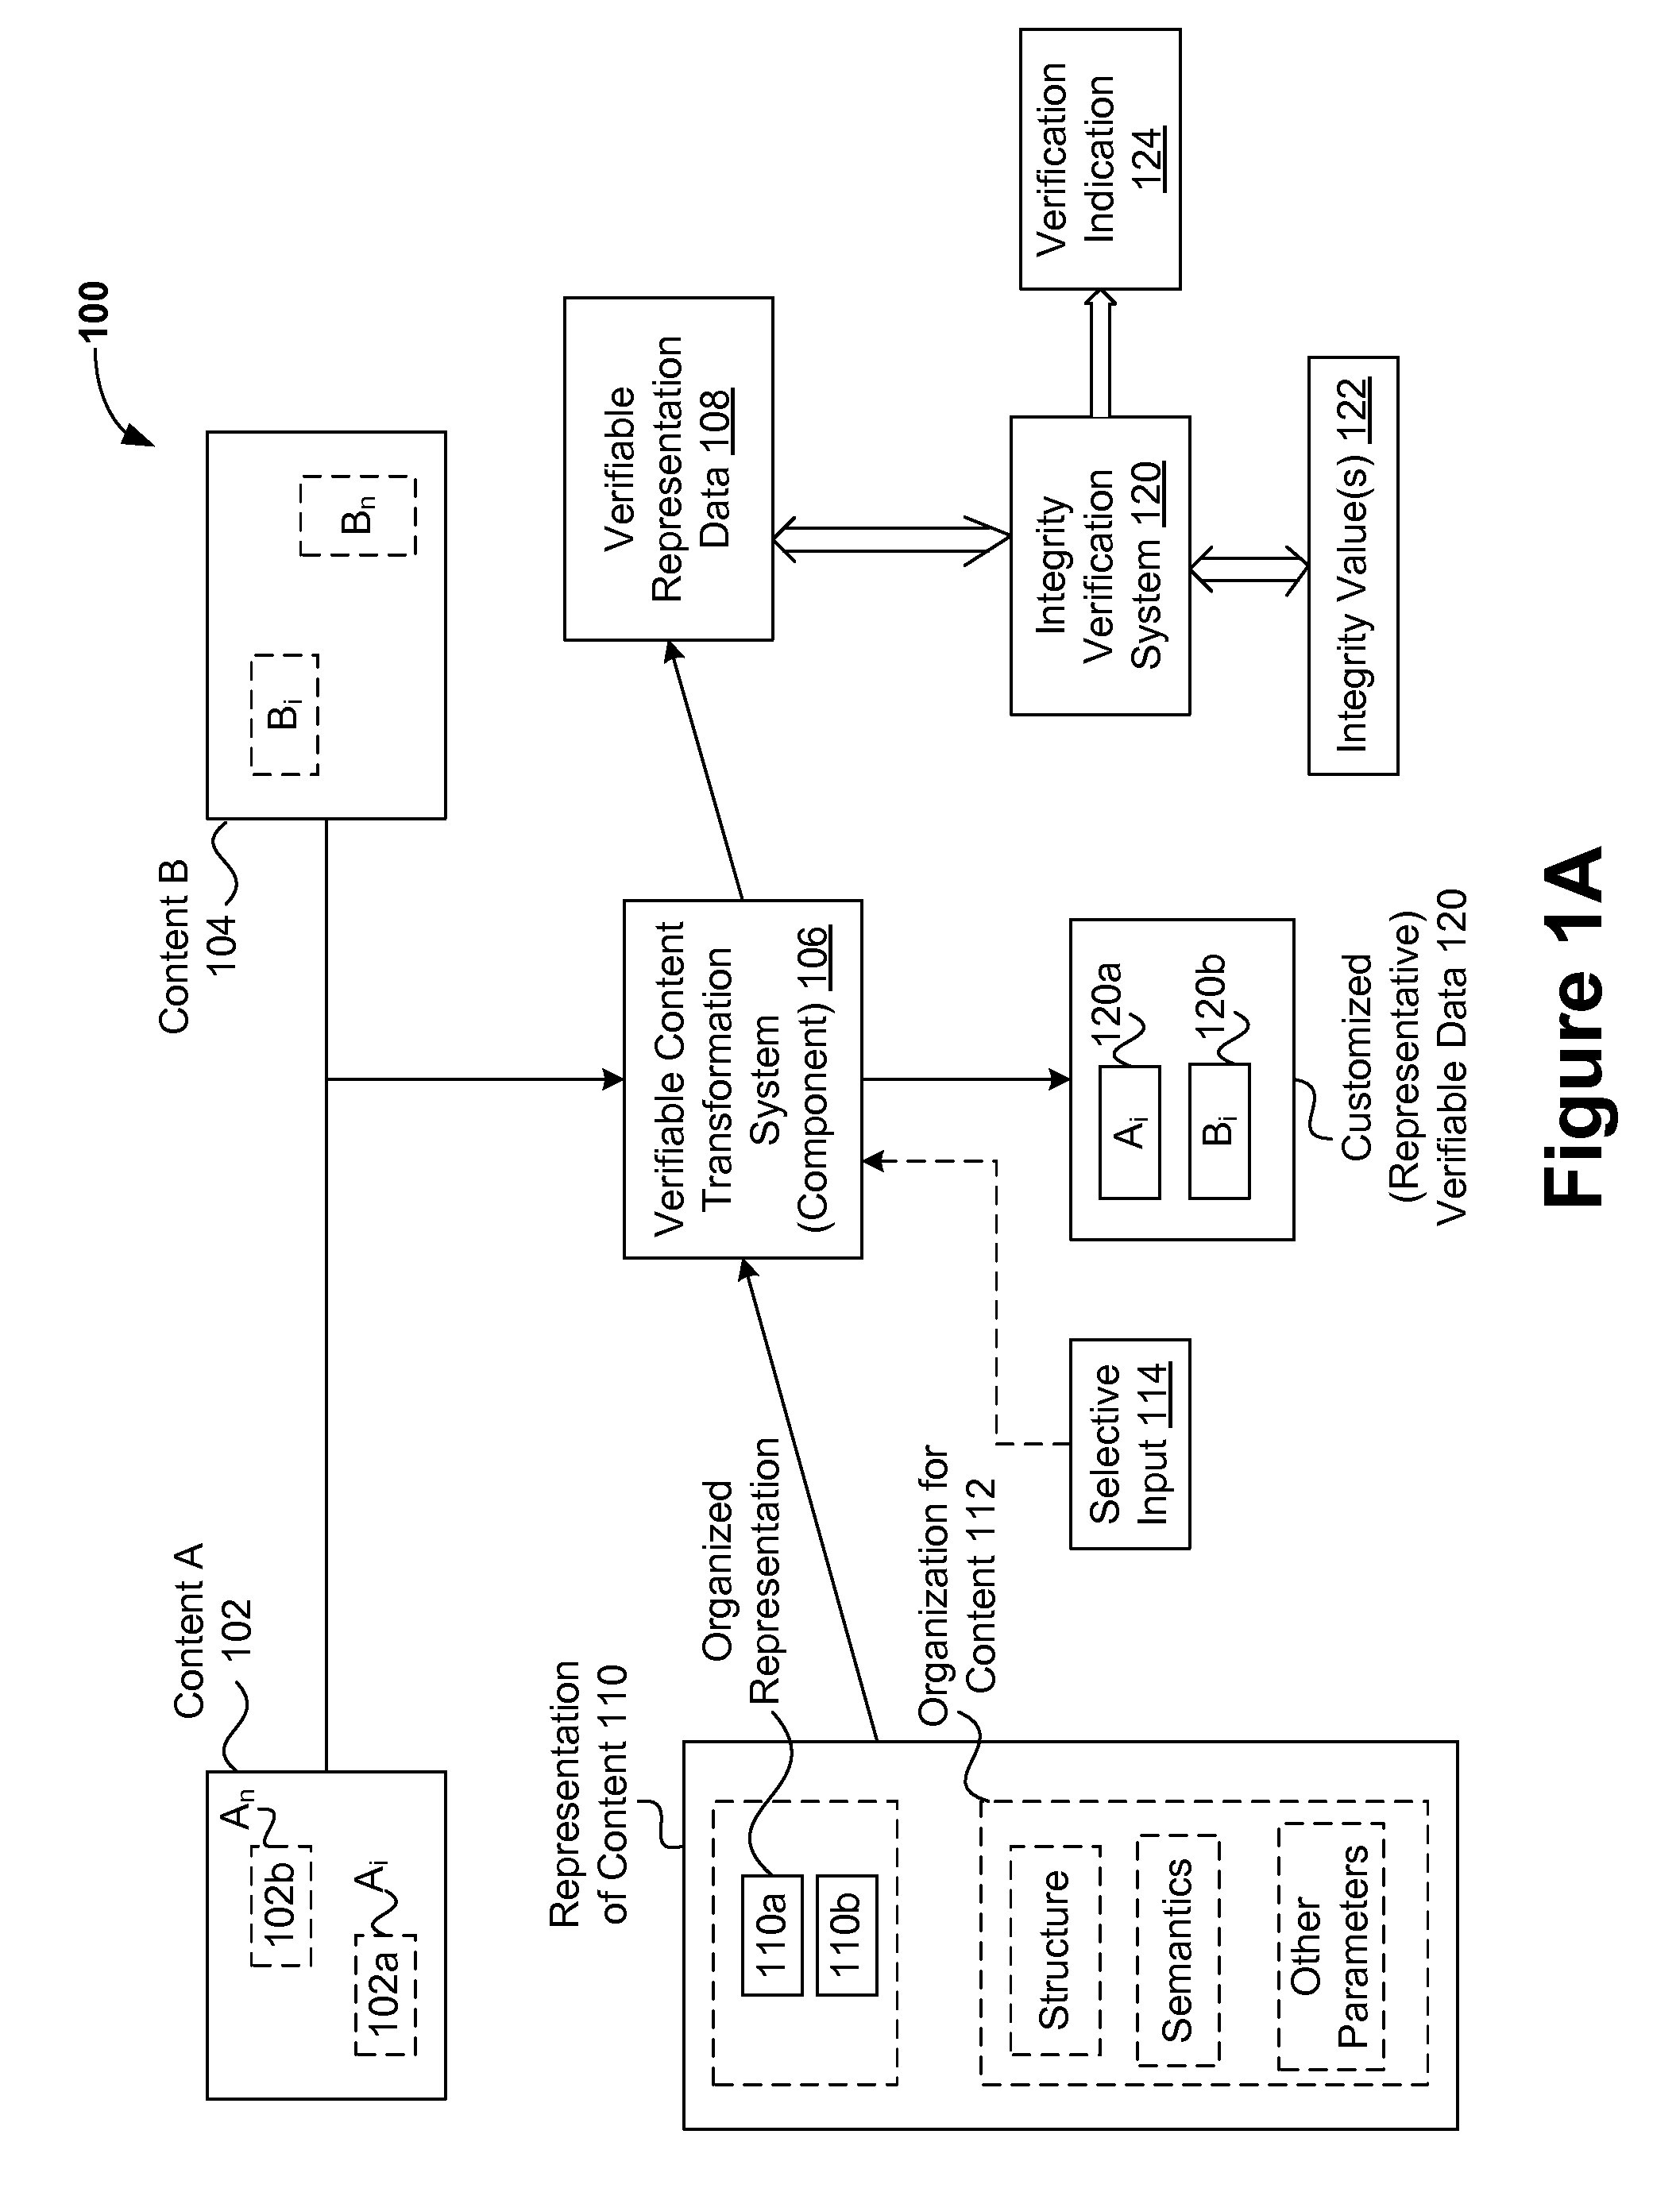 Verification of integrity of computing environments for safe computing